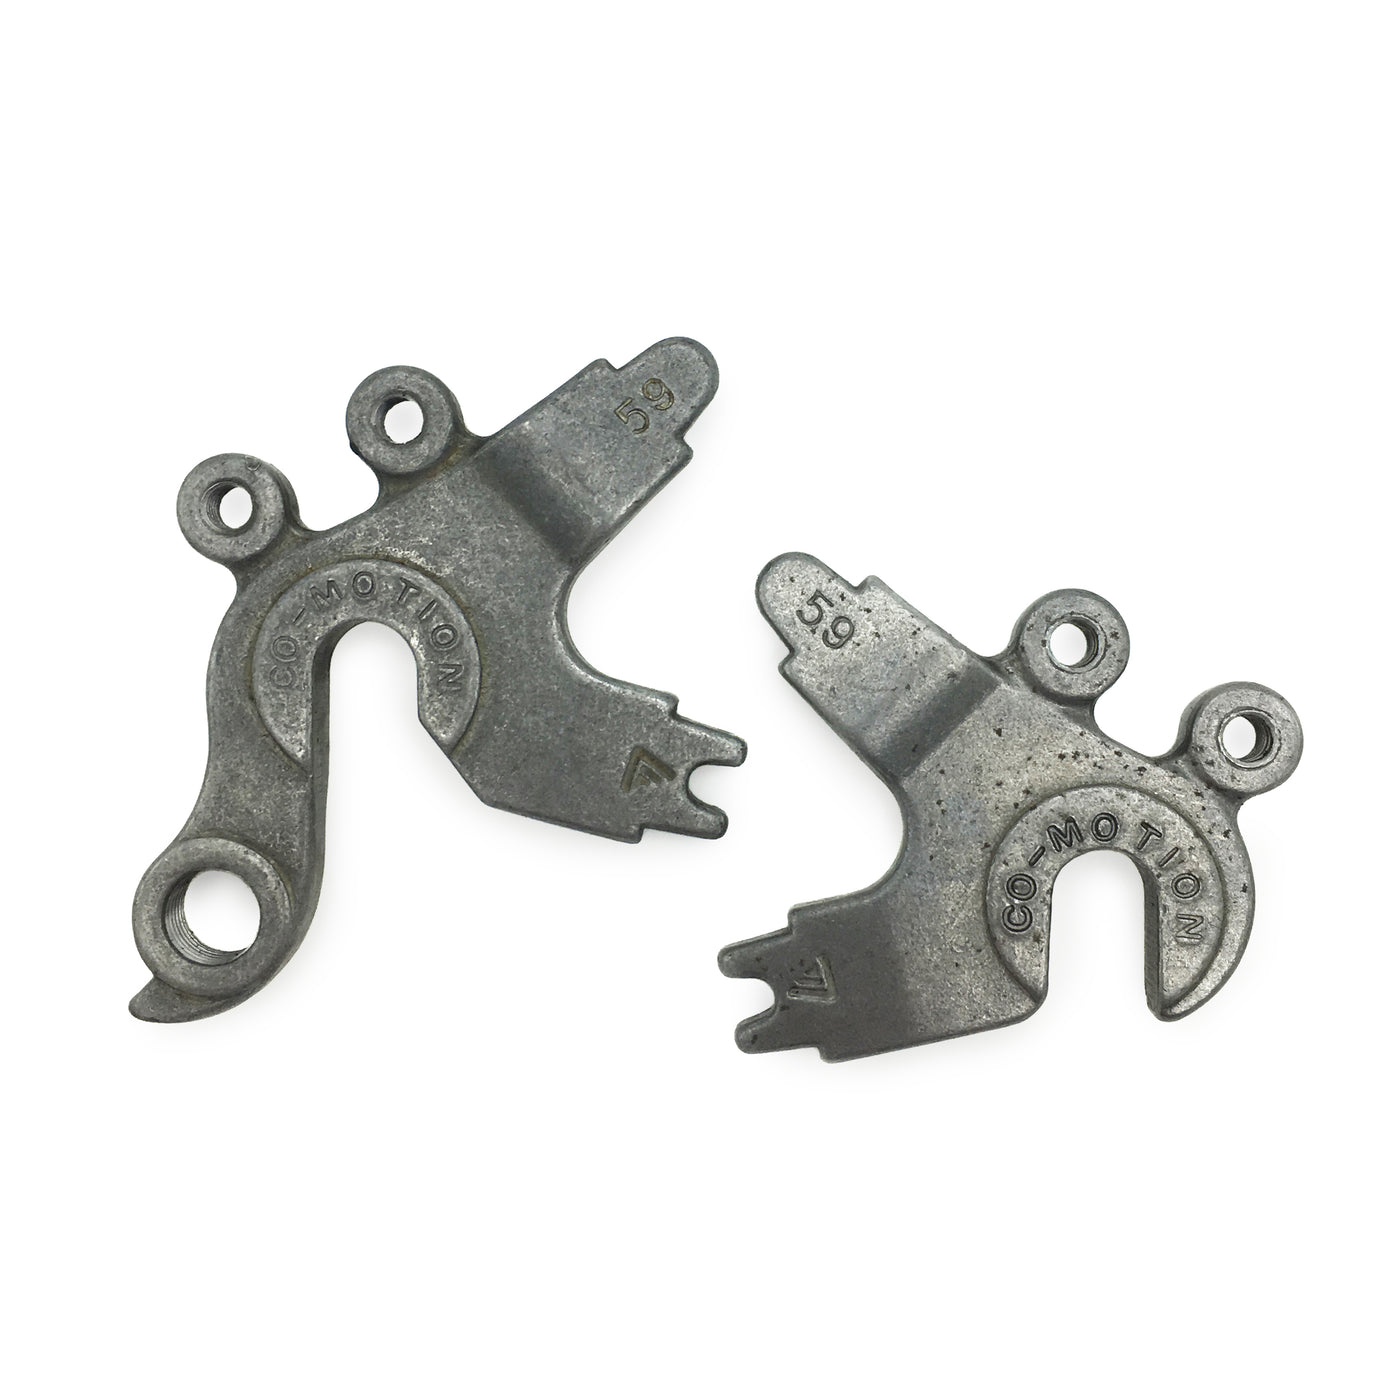 Rear vertical dropouts - tab style - 59° seatstay/chainstay angle